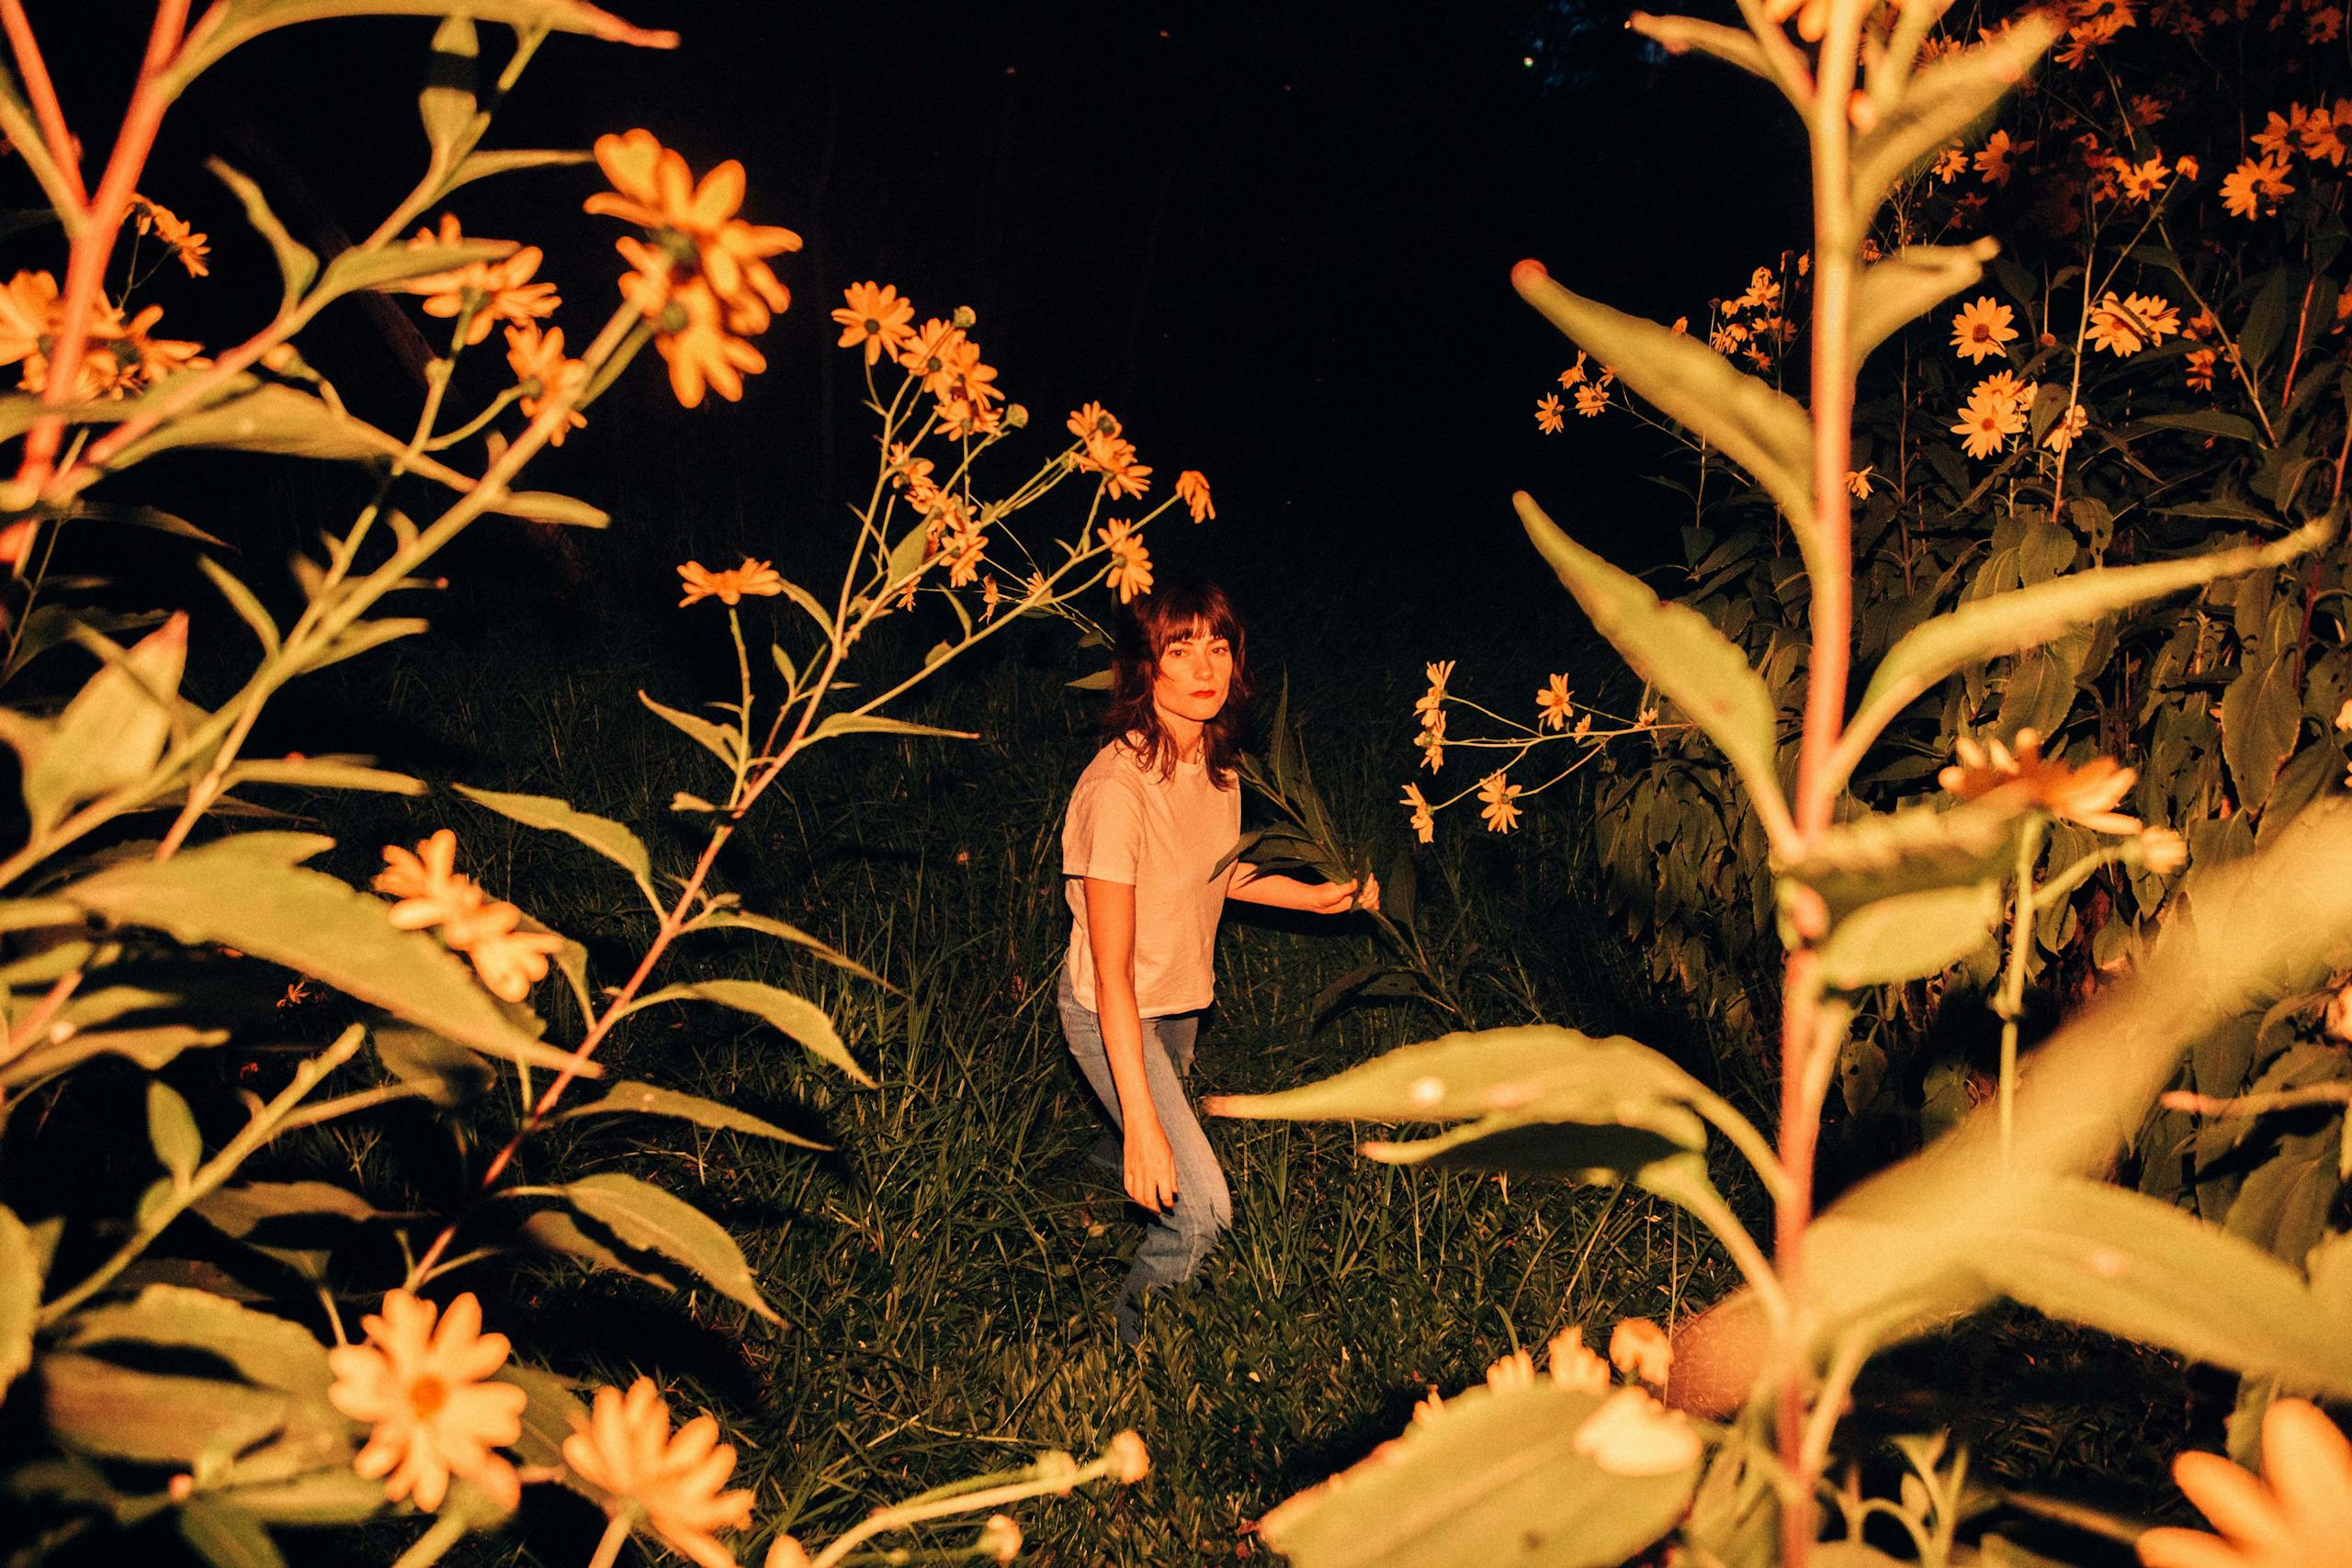 A woman standing amidst a field of flowers under the night sky.